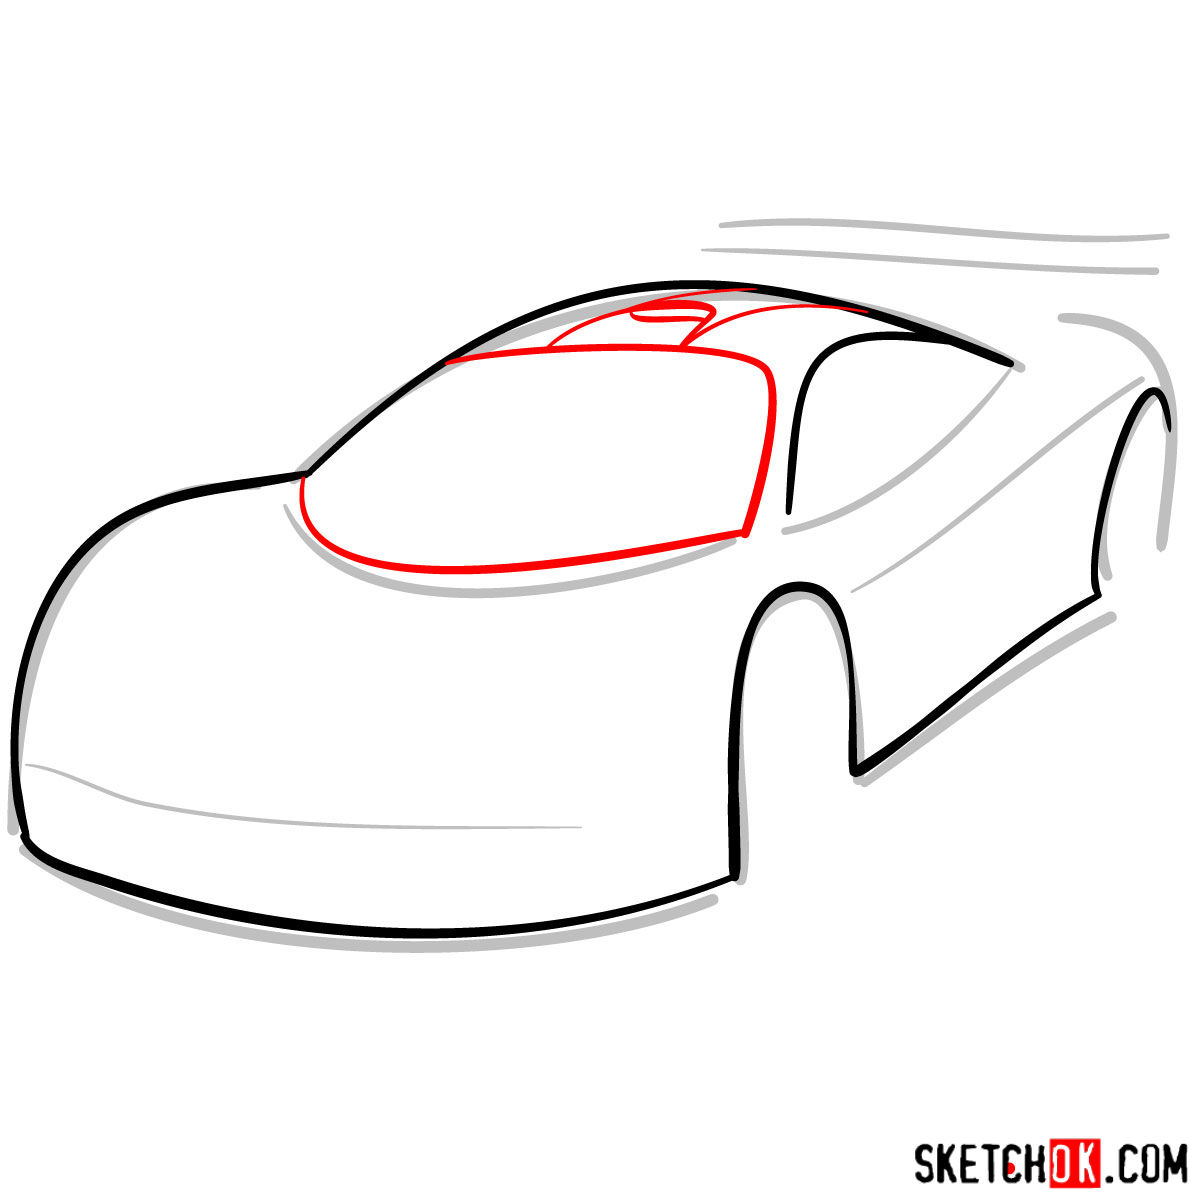 McLaren F1 - step by step drawing guide - step 05